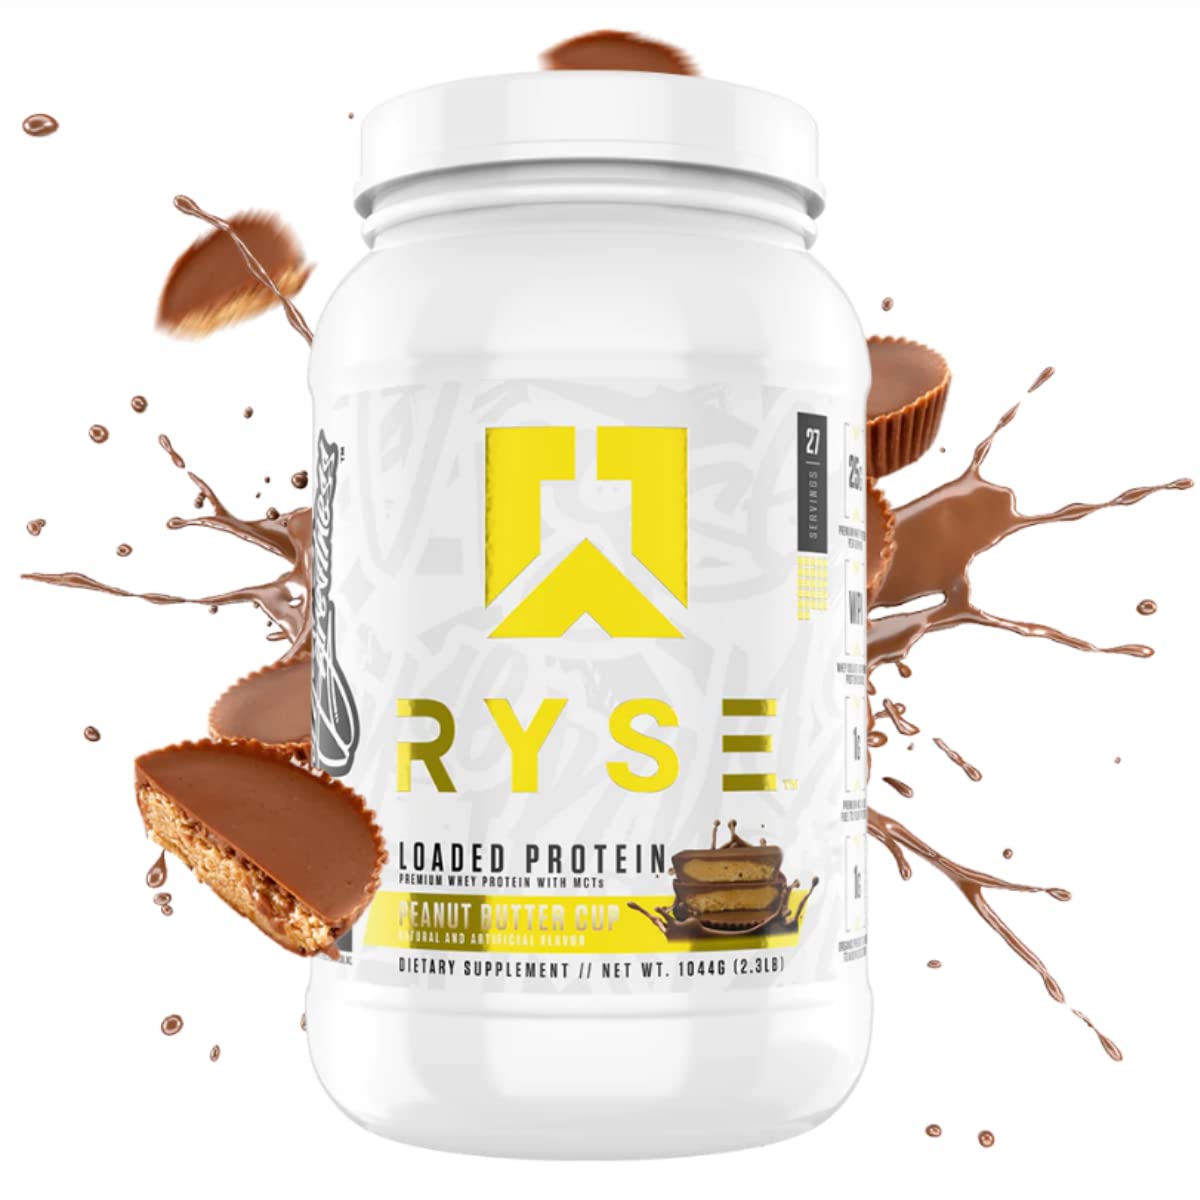 Ryse Loaded Protein Powder | 25g Whey Protein Isolate & Concentrate | with  Prebiotic Fiber & MCTs | Low Carbs & Low Sugar | 54 Servings (Peanut Butter